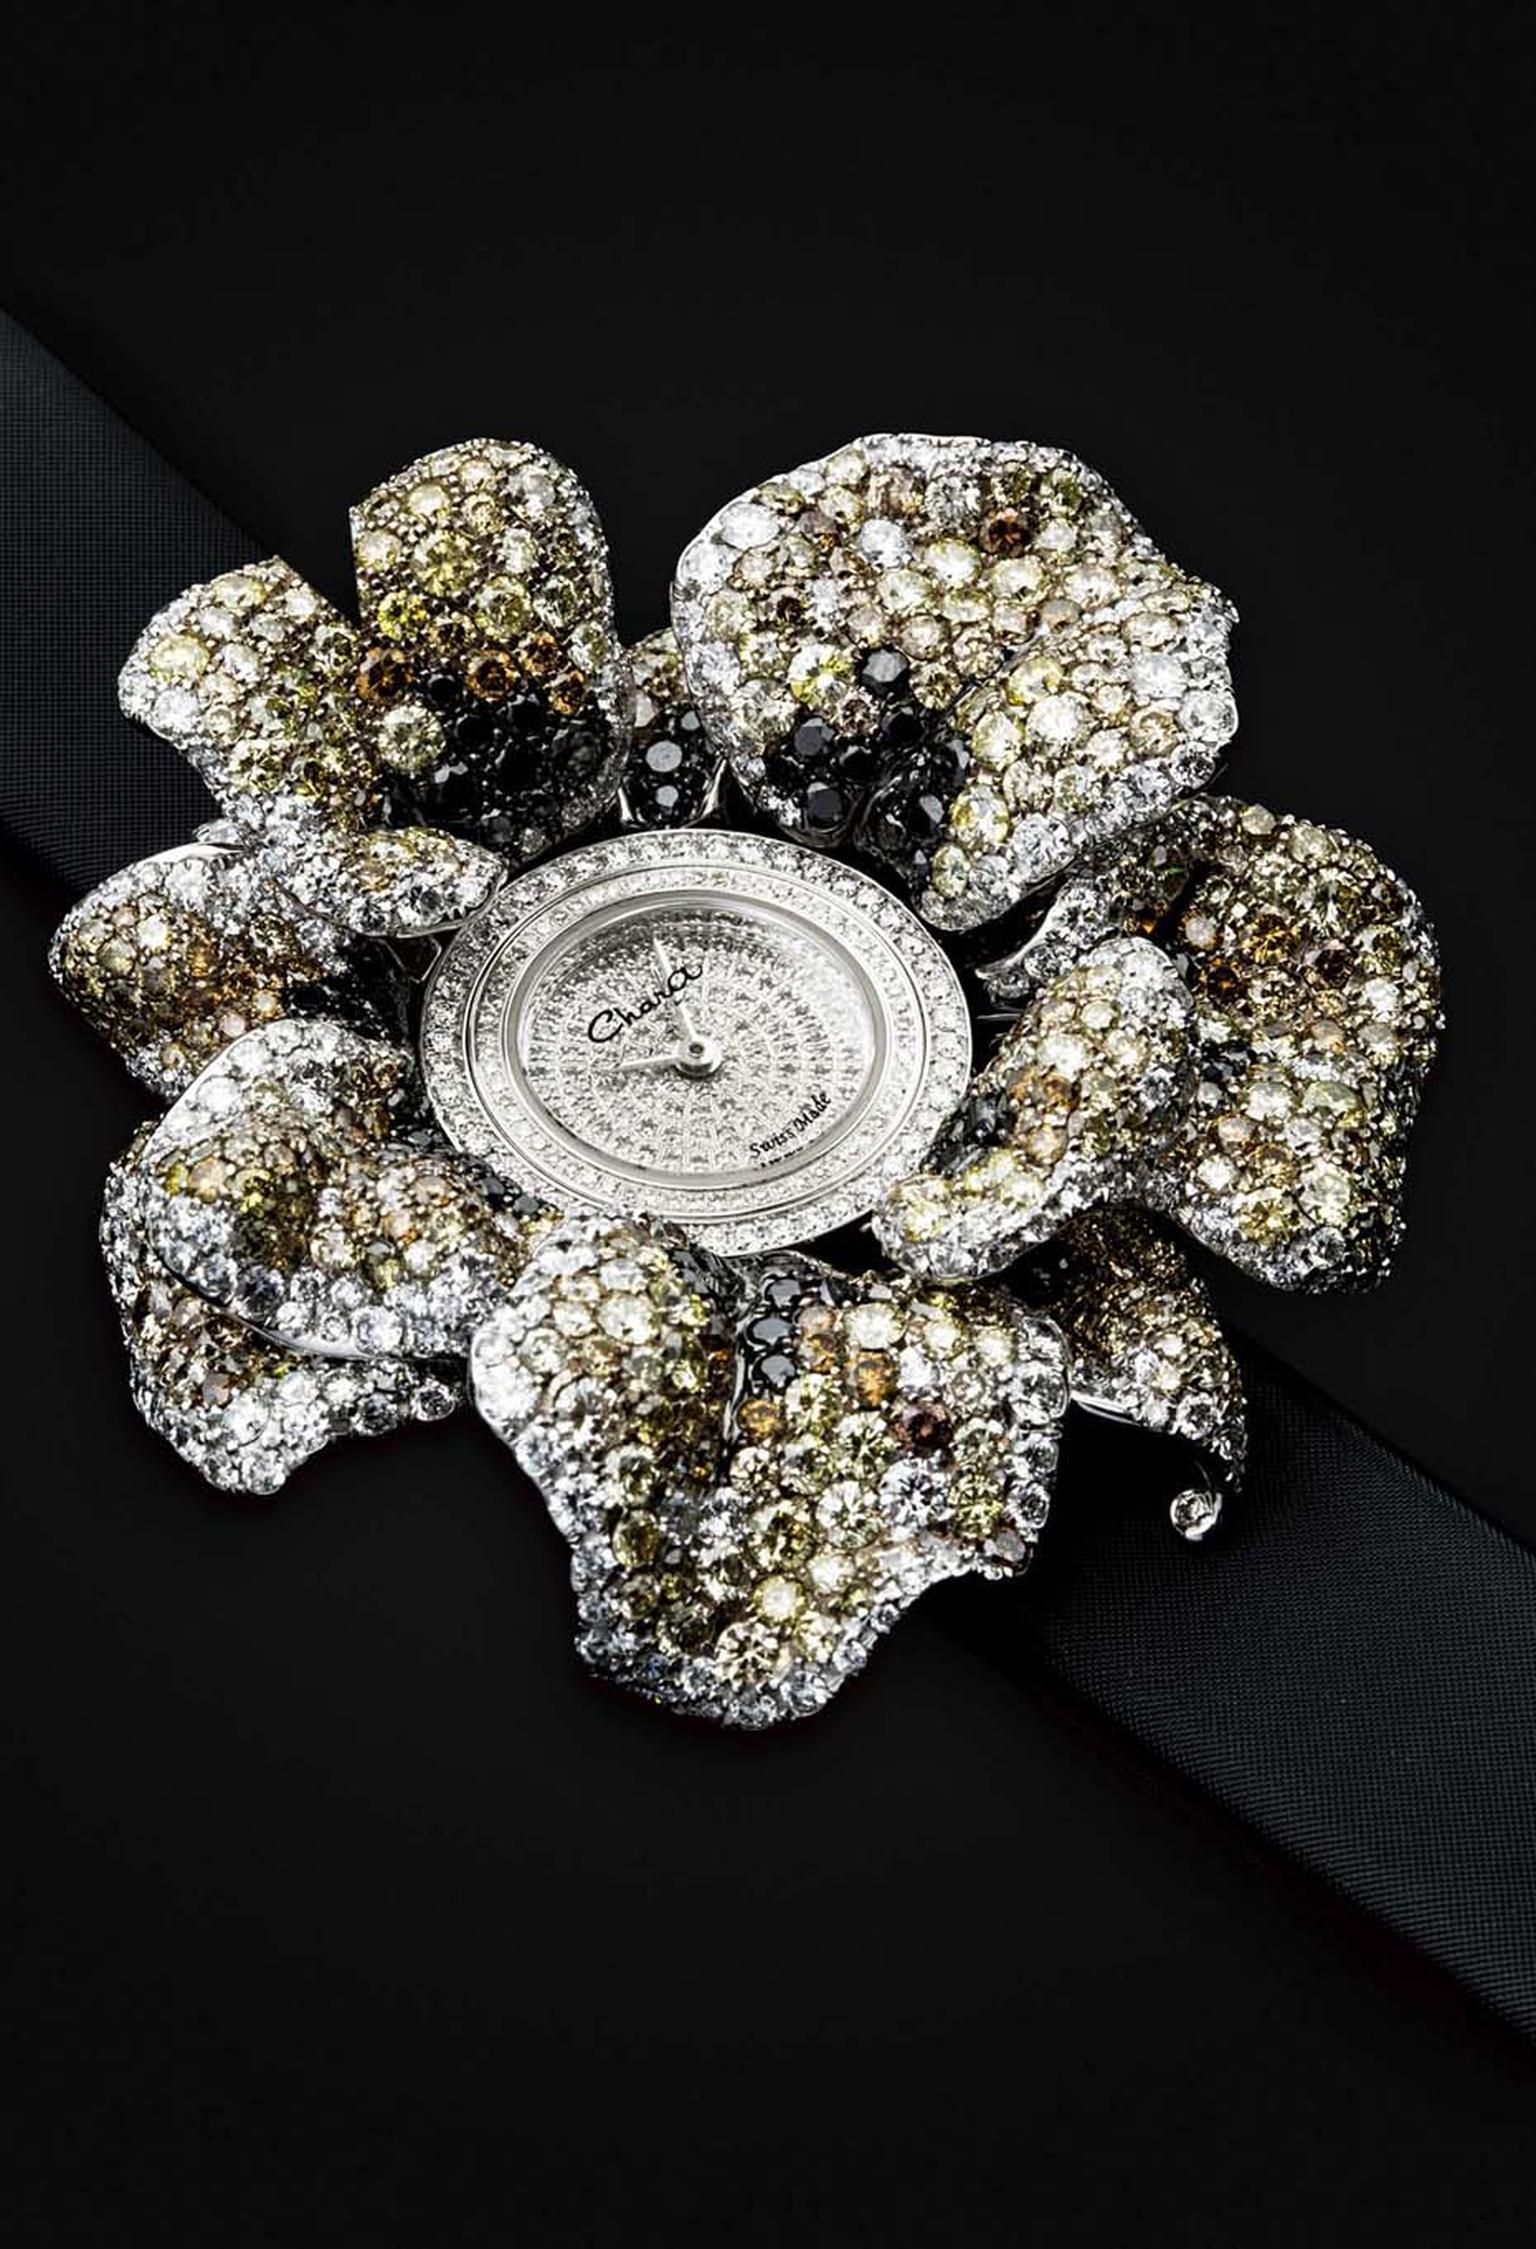 Asian high jeweller Chara Wen: unconventional black stones intensify the sparkle of her captivating jewels